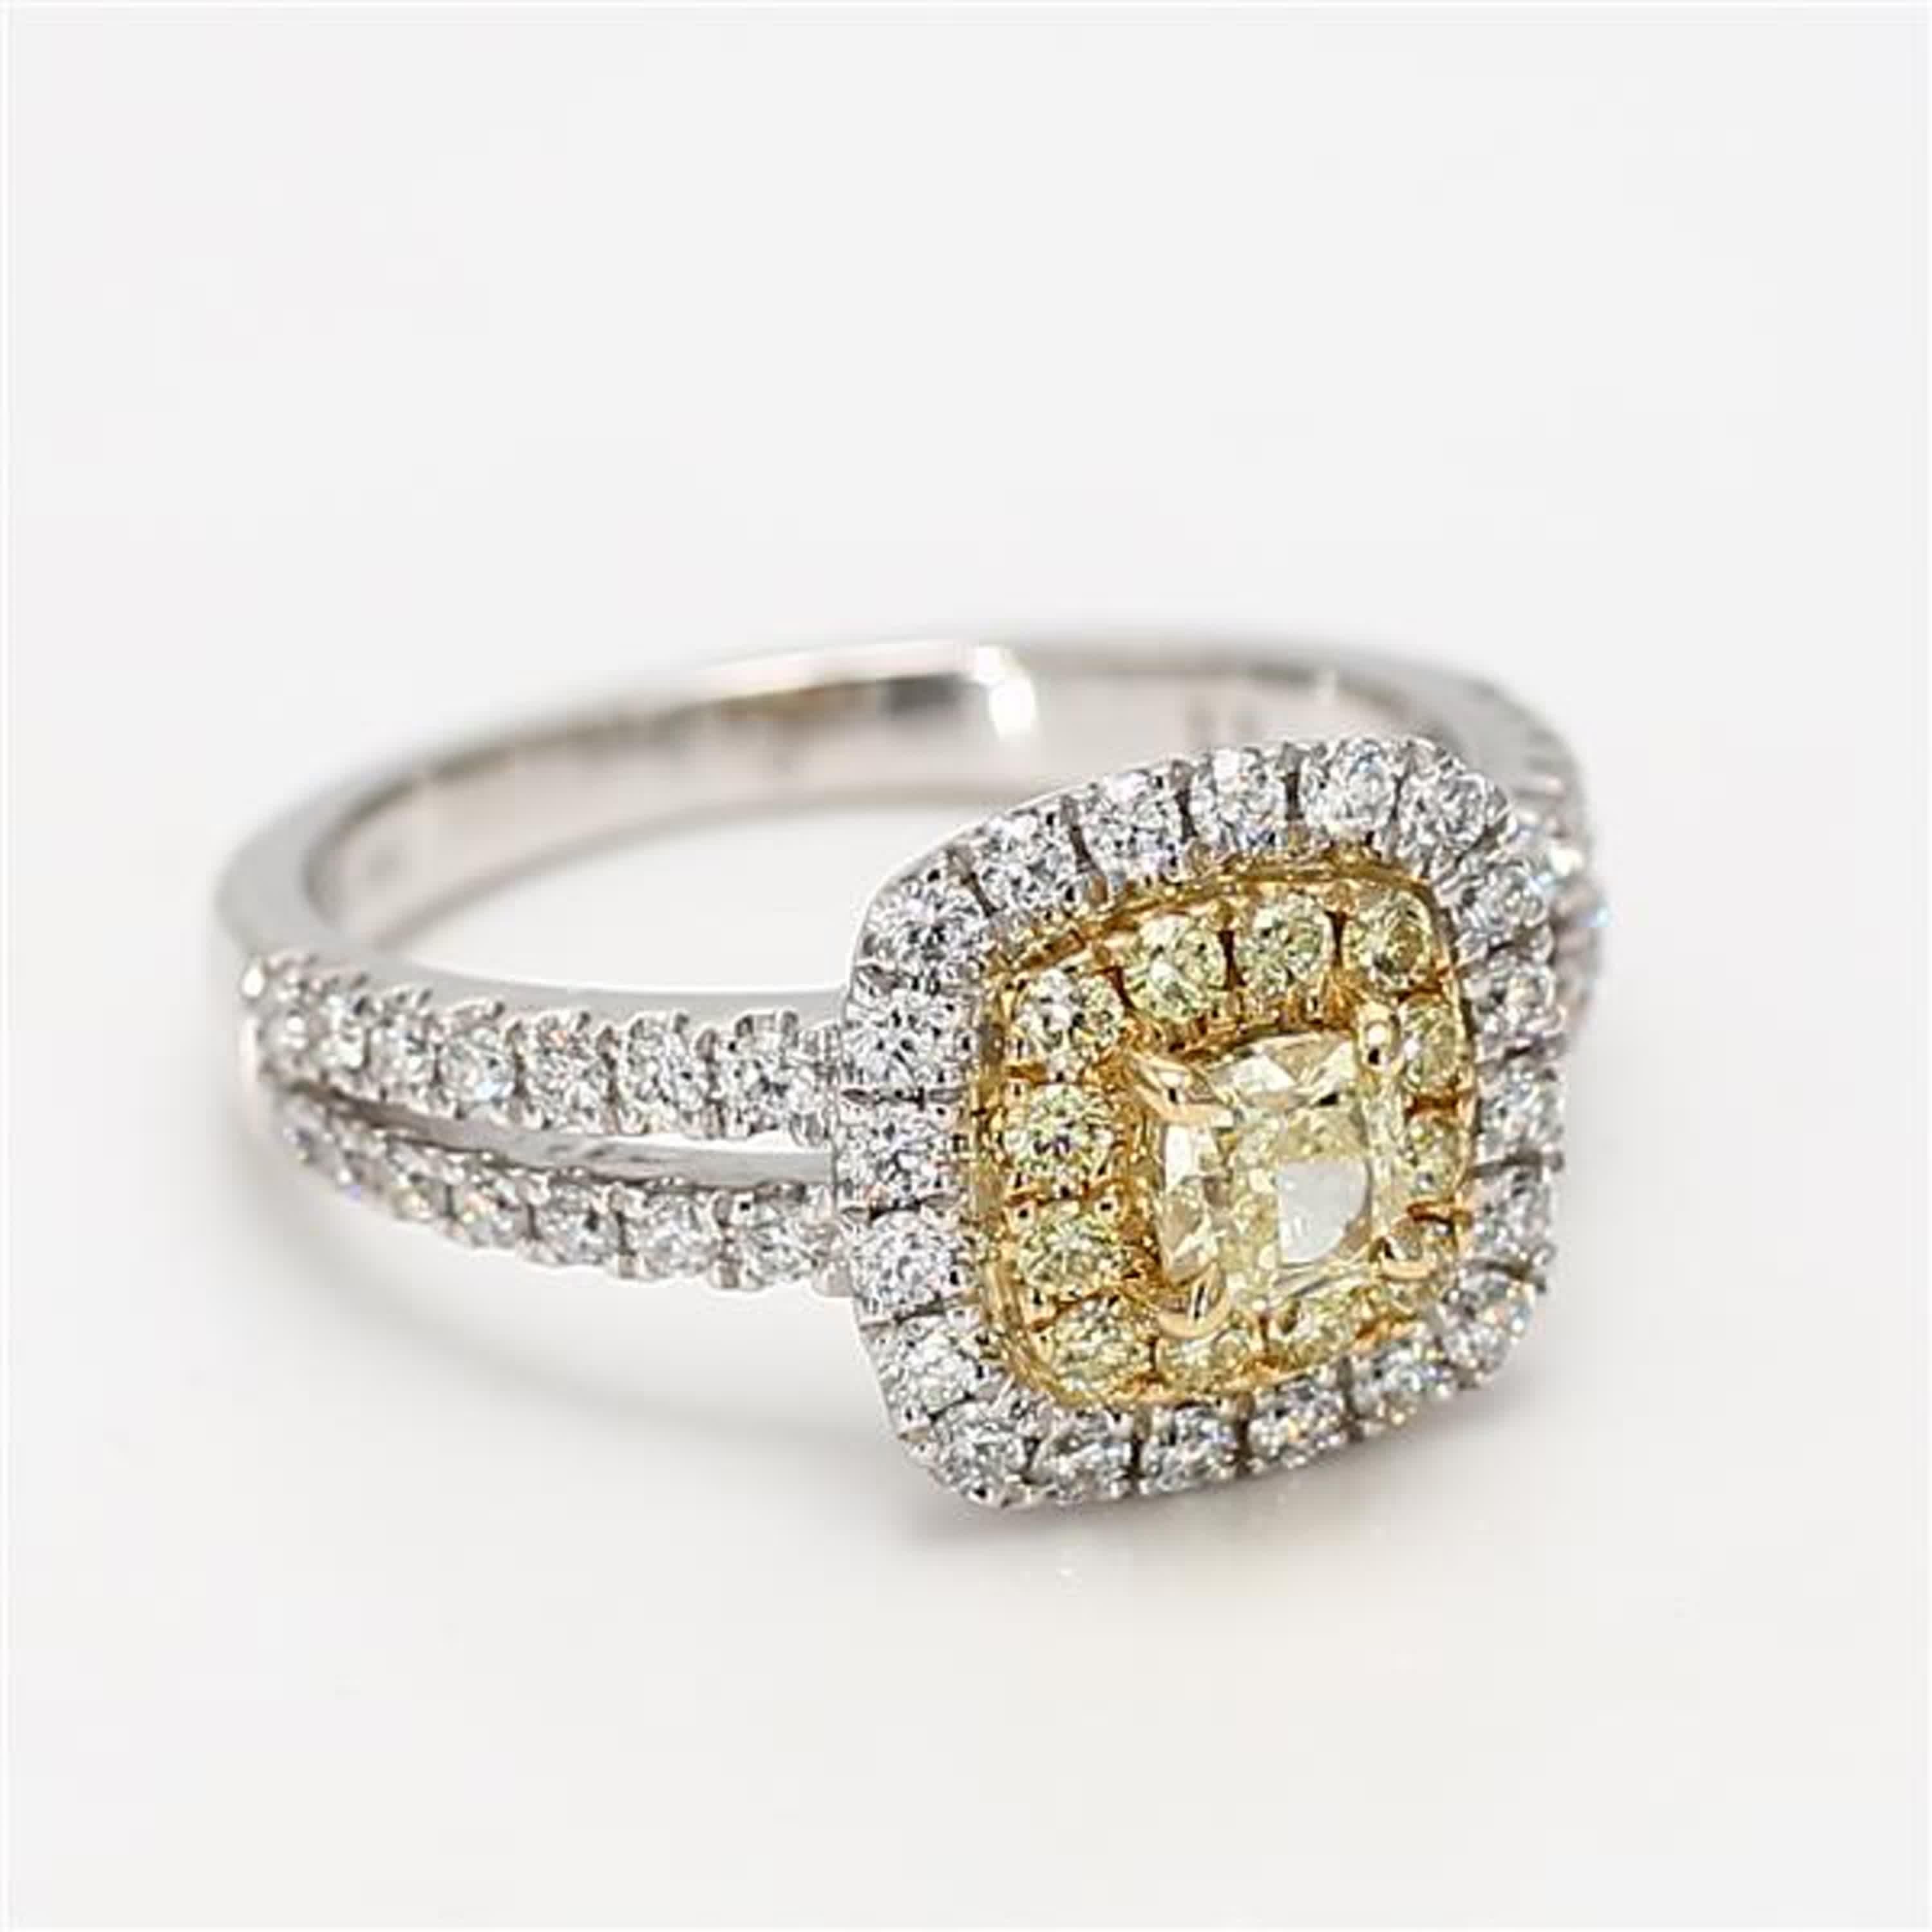 Natural Yellow Cushion and White Diamond 1.11 Carat TW Platinum Cocktail Ring For Sale 1